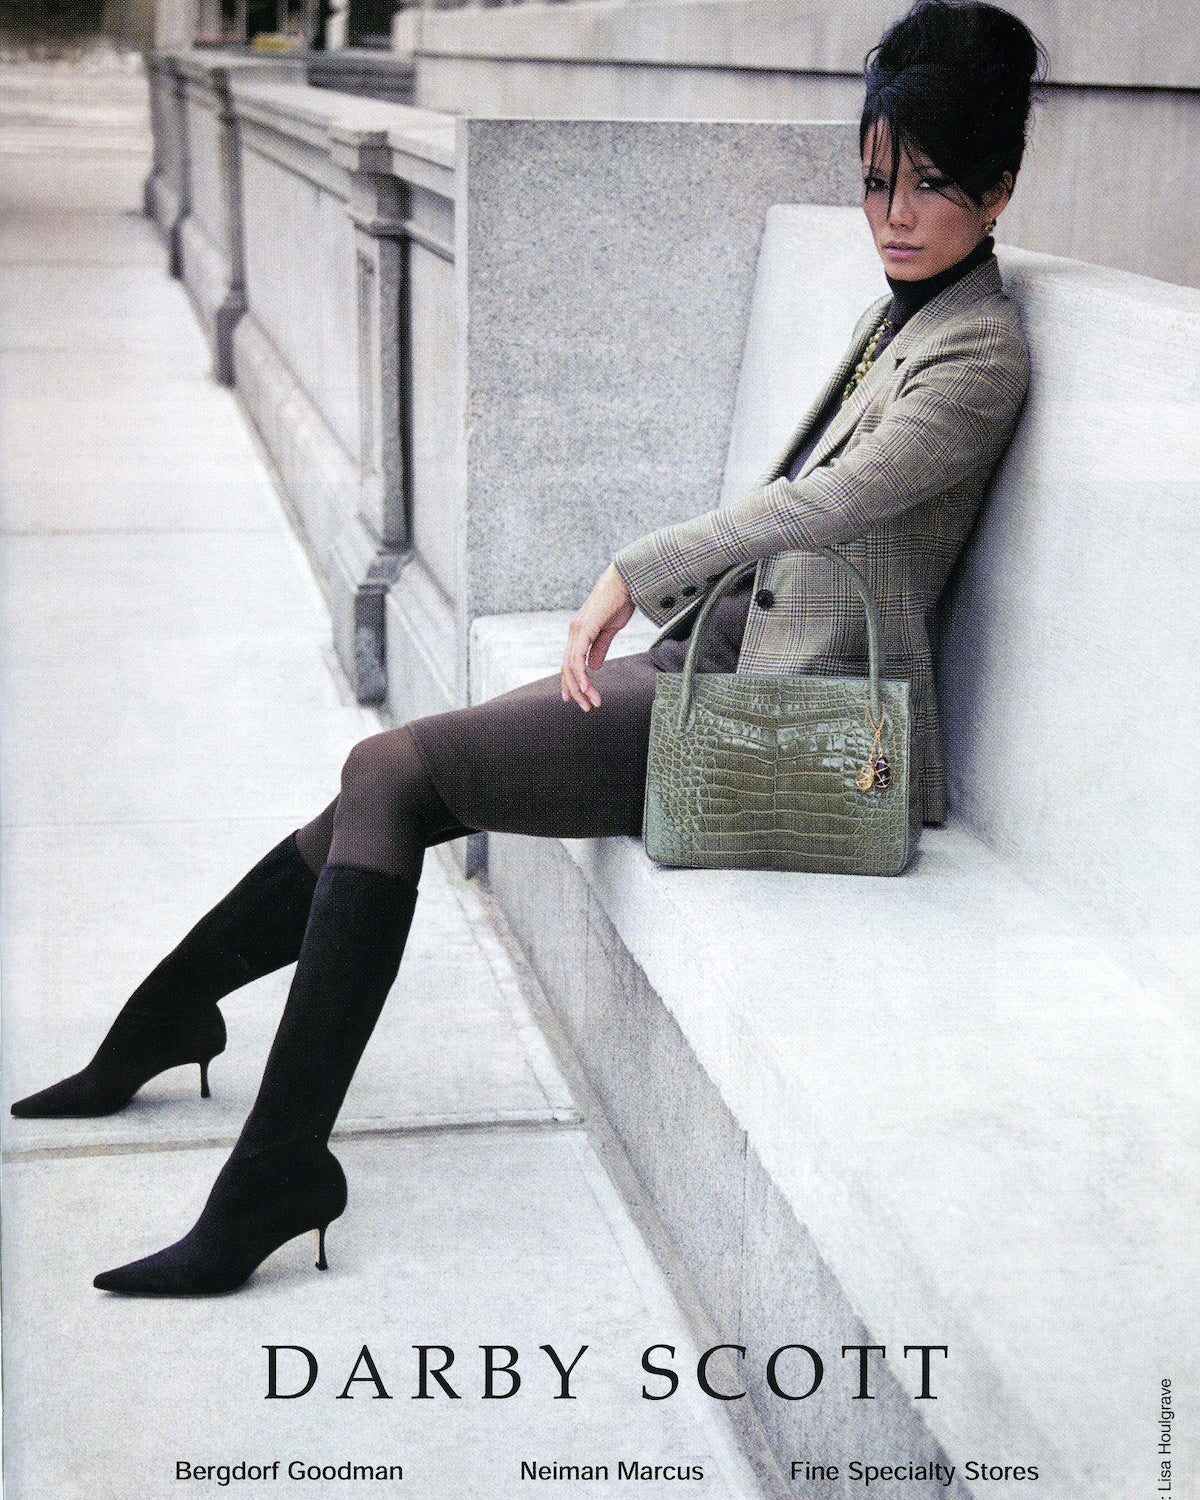 Harpers Baazar Ad showing a model on bench with a Darby Scott Thompson Tote in green Alligator